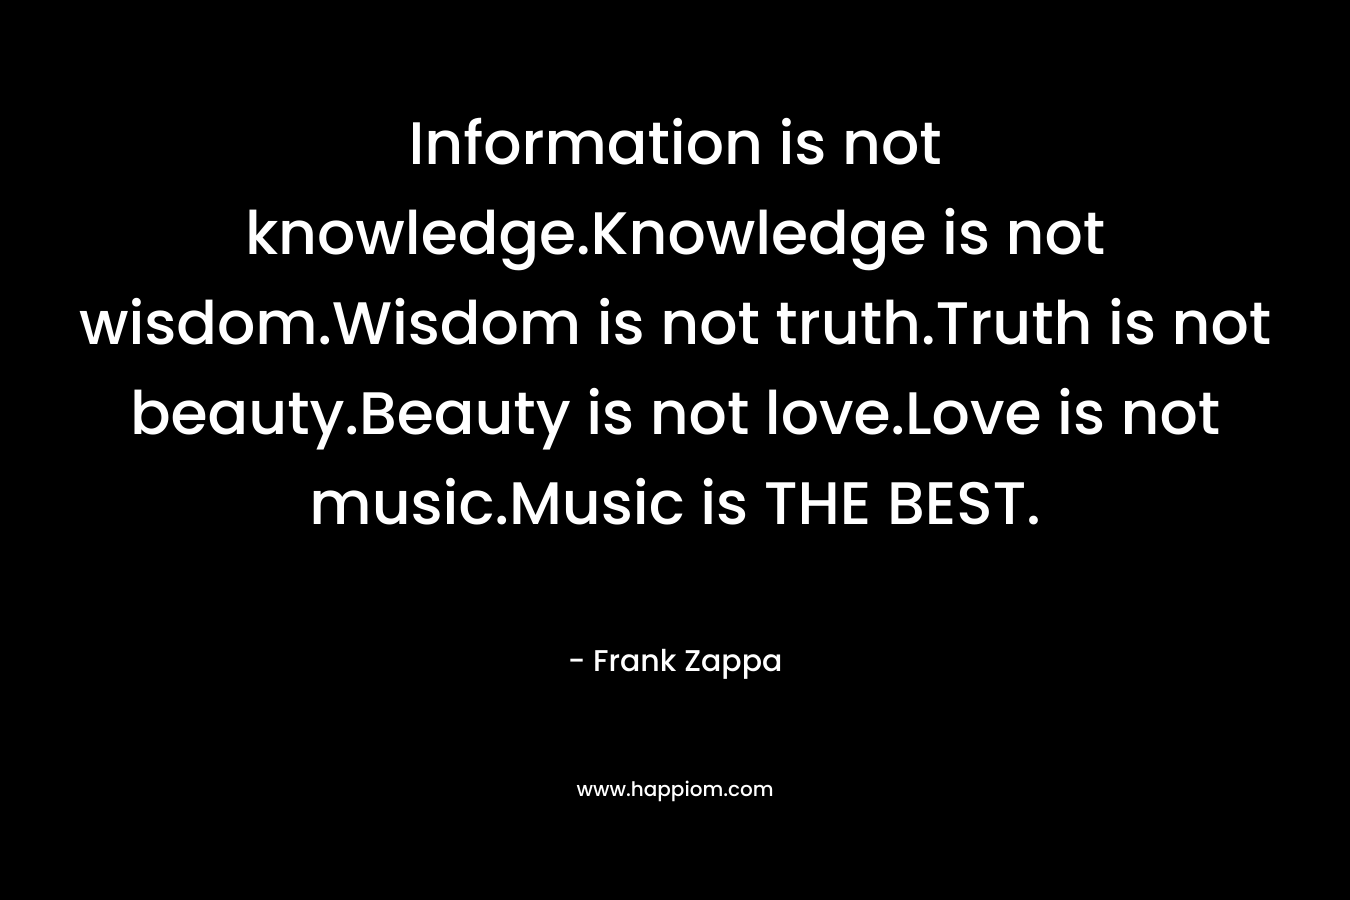 Information is not knowledge.Knowledge is not wisdom.Wisdom is not truth.Truth is not beauty.Beauty is not love.Love is not music.Music is THE BEST. – Frank Zappa